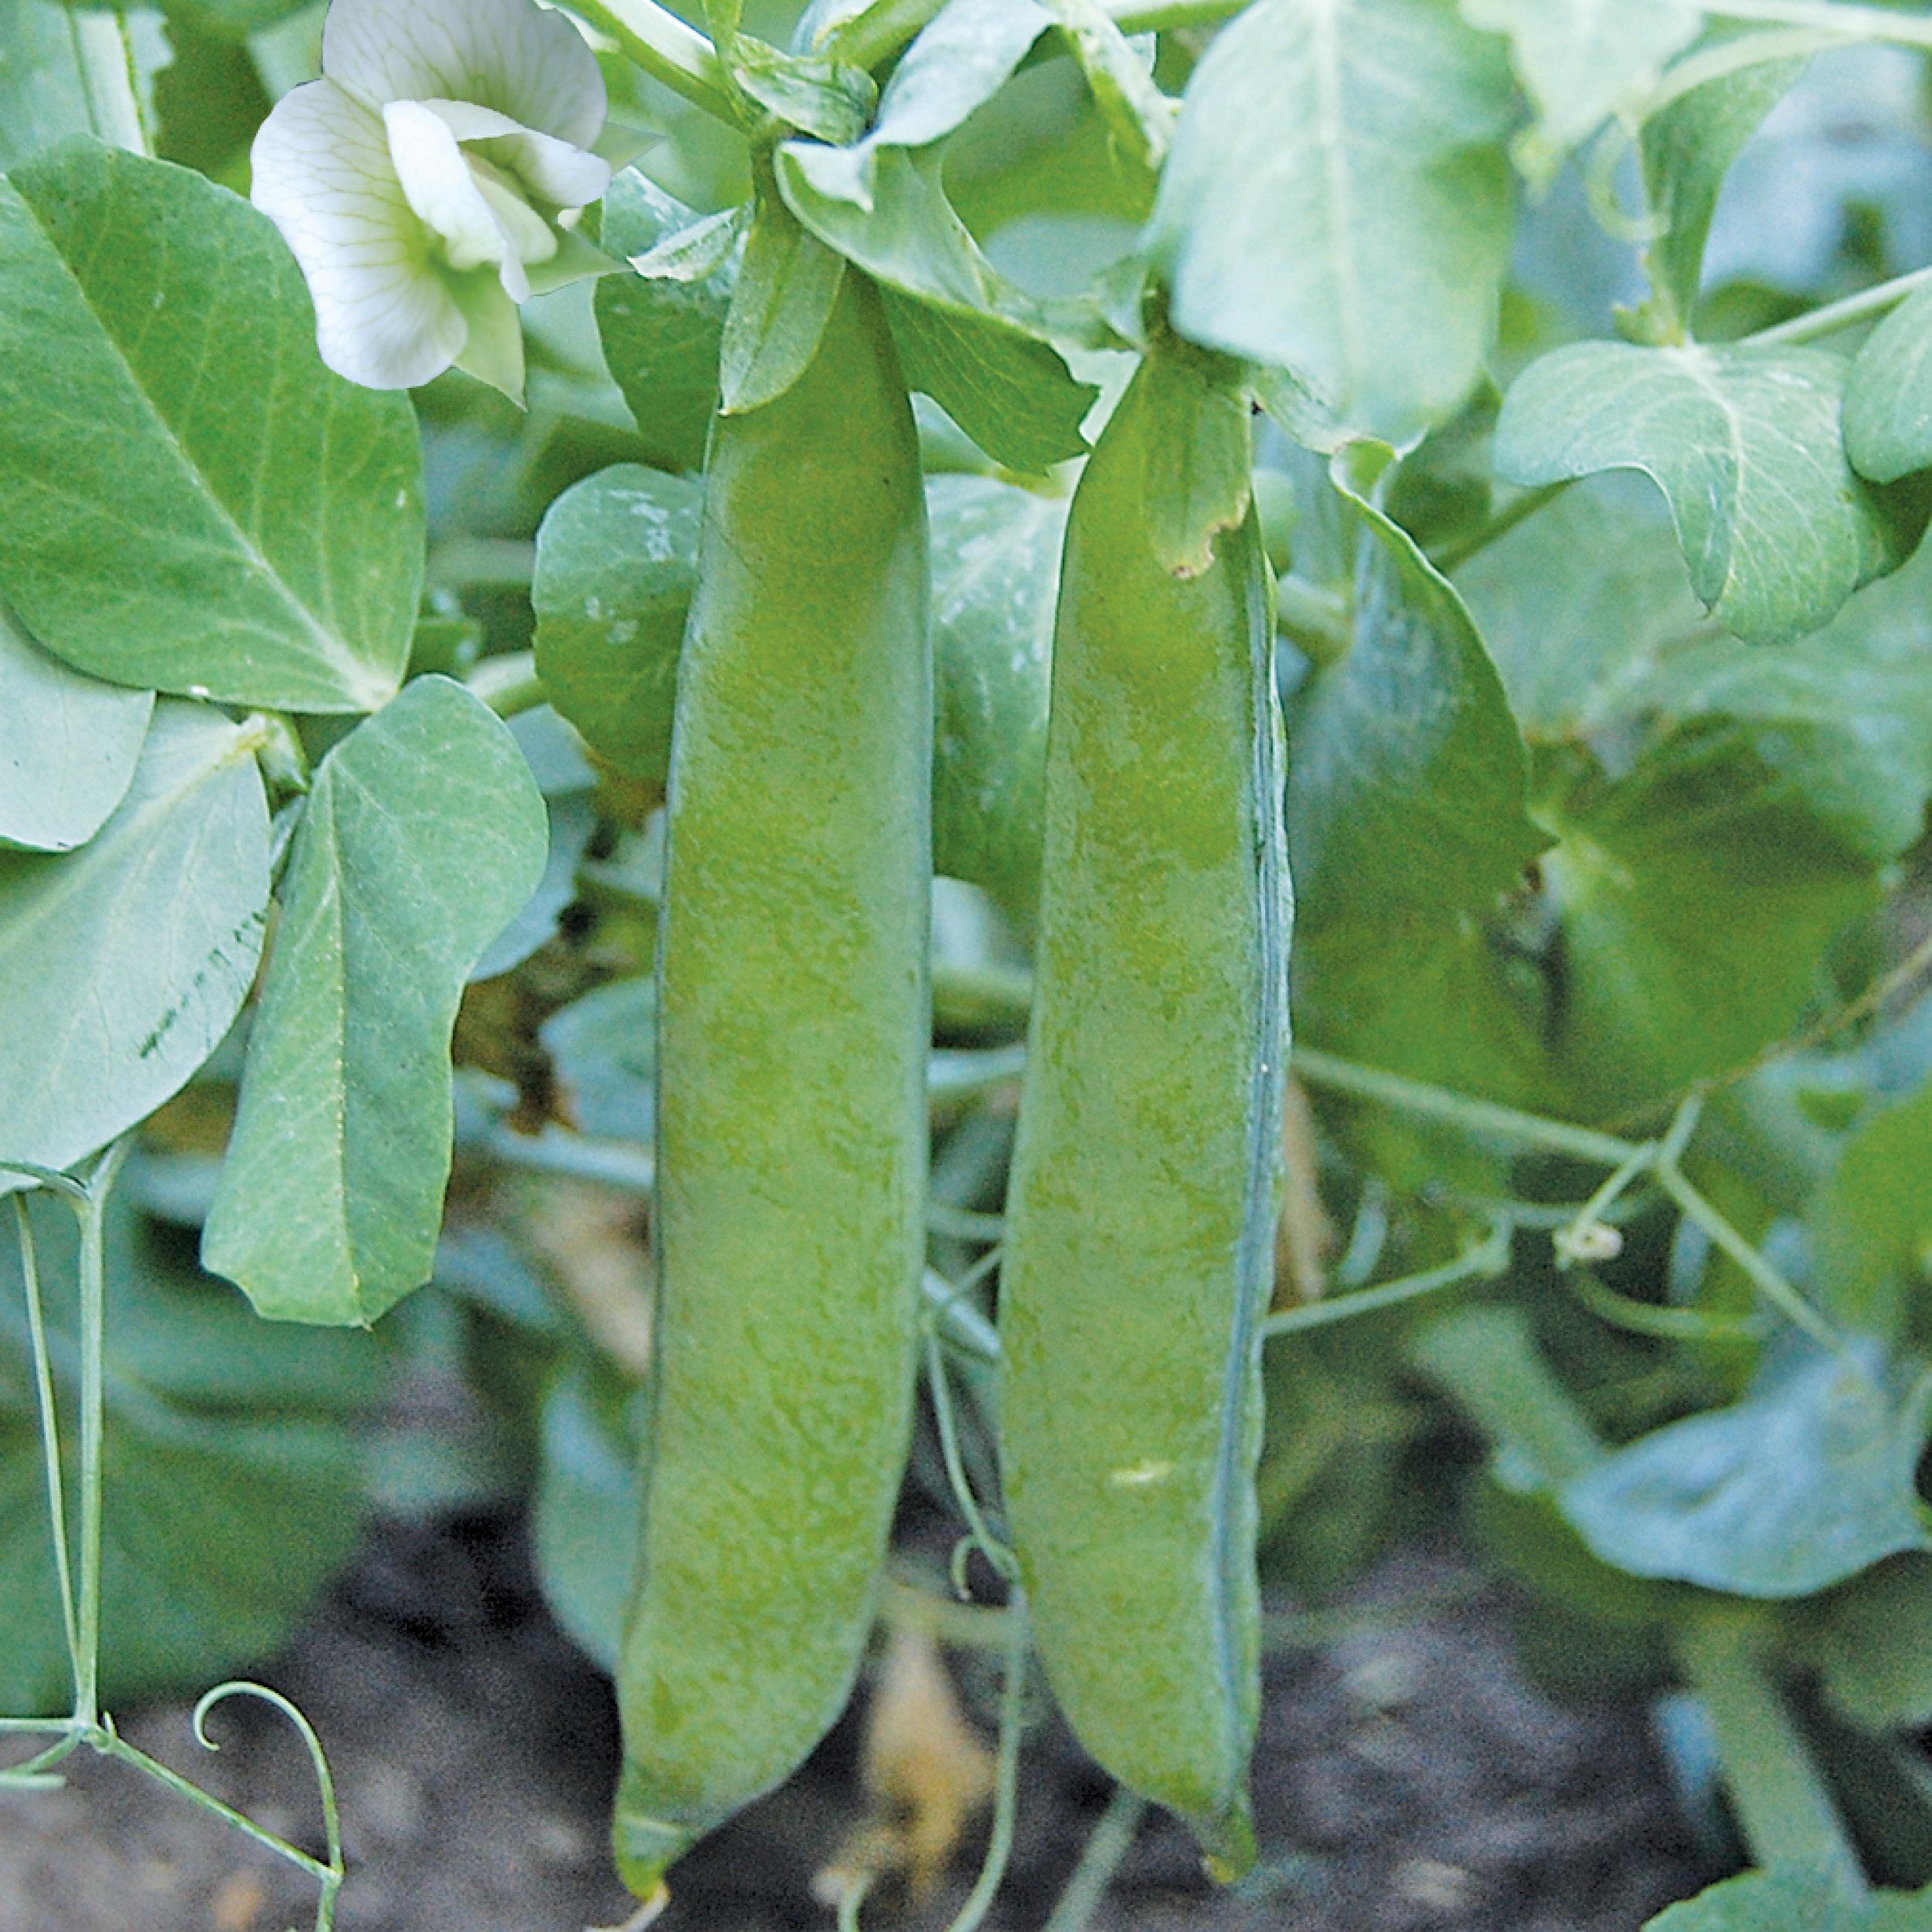 The Wholesome Delight of Green Arrow Peas: A Fresh Perspective on Tasty and Nutritious Legumes